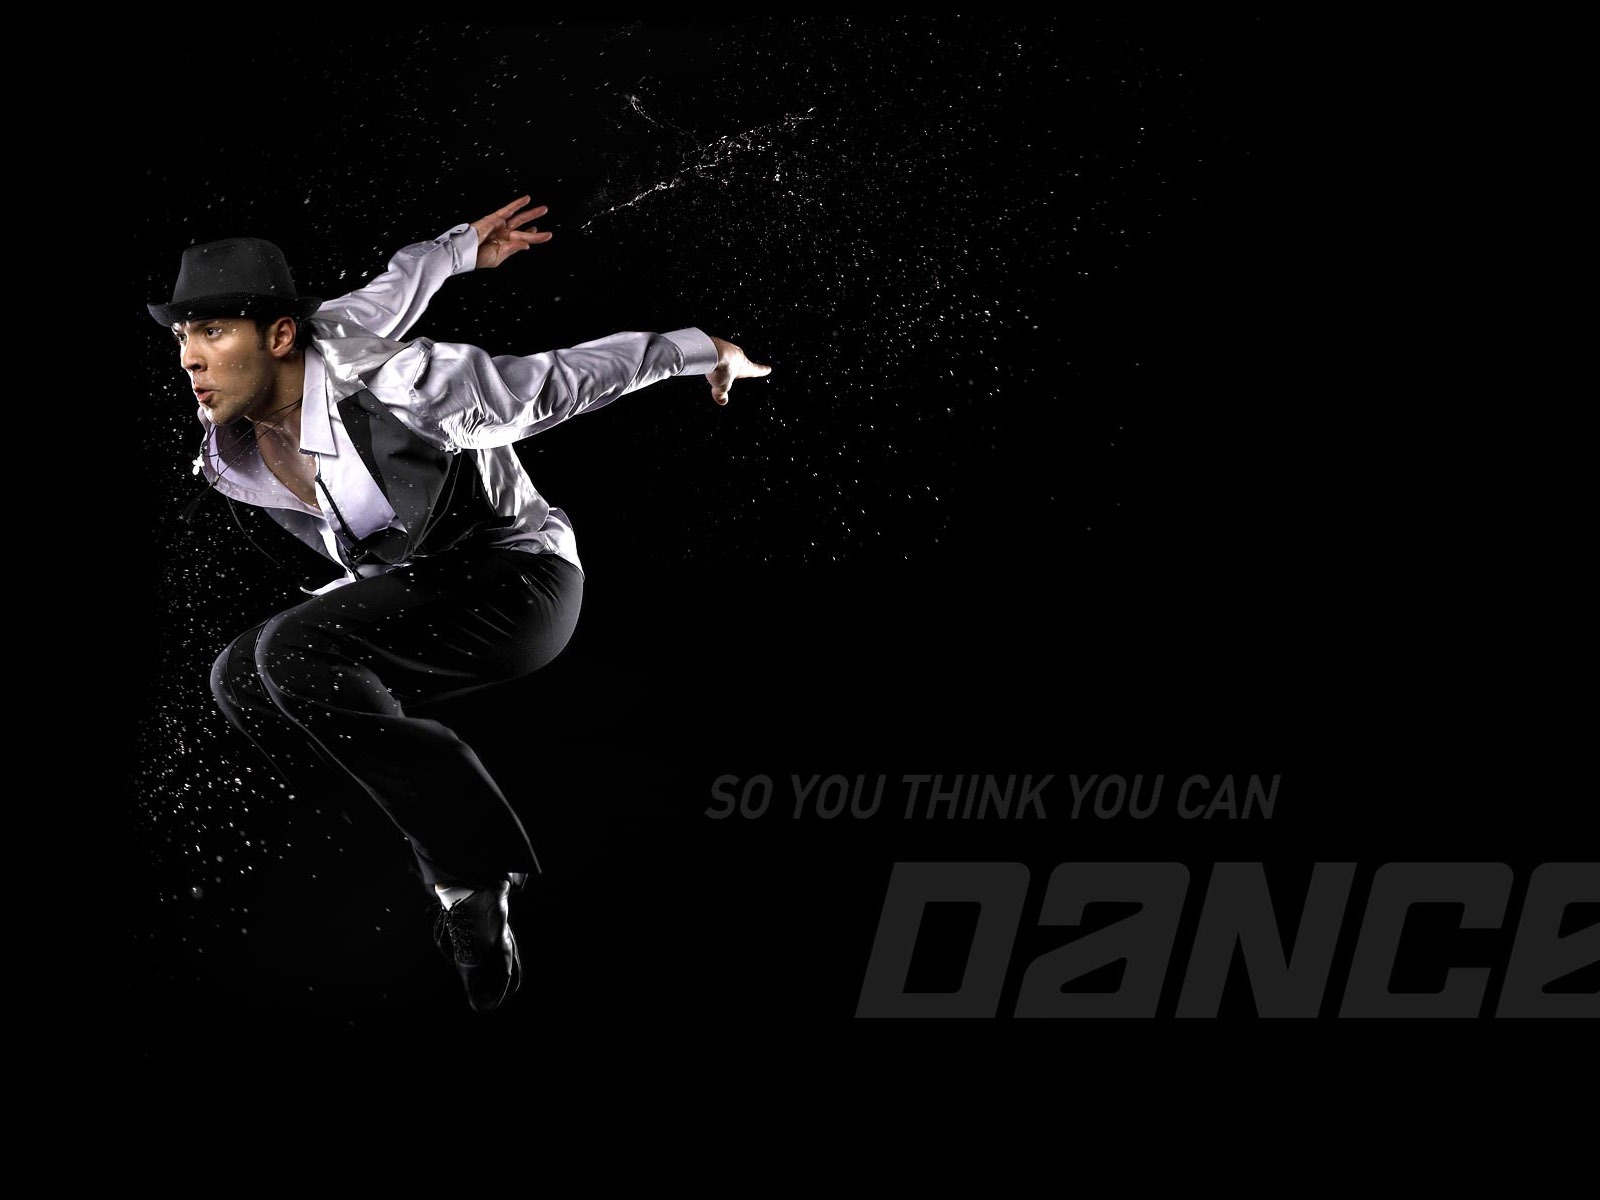 So You Think You Can Dance wallpaper (1) #12 - 1600x1200